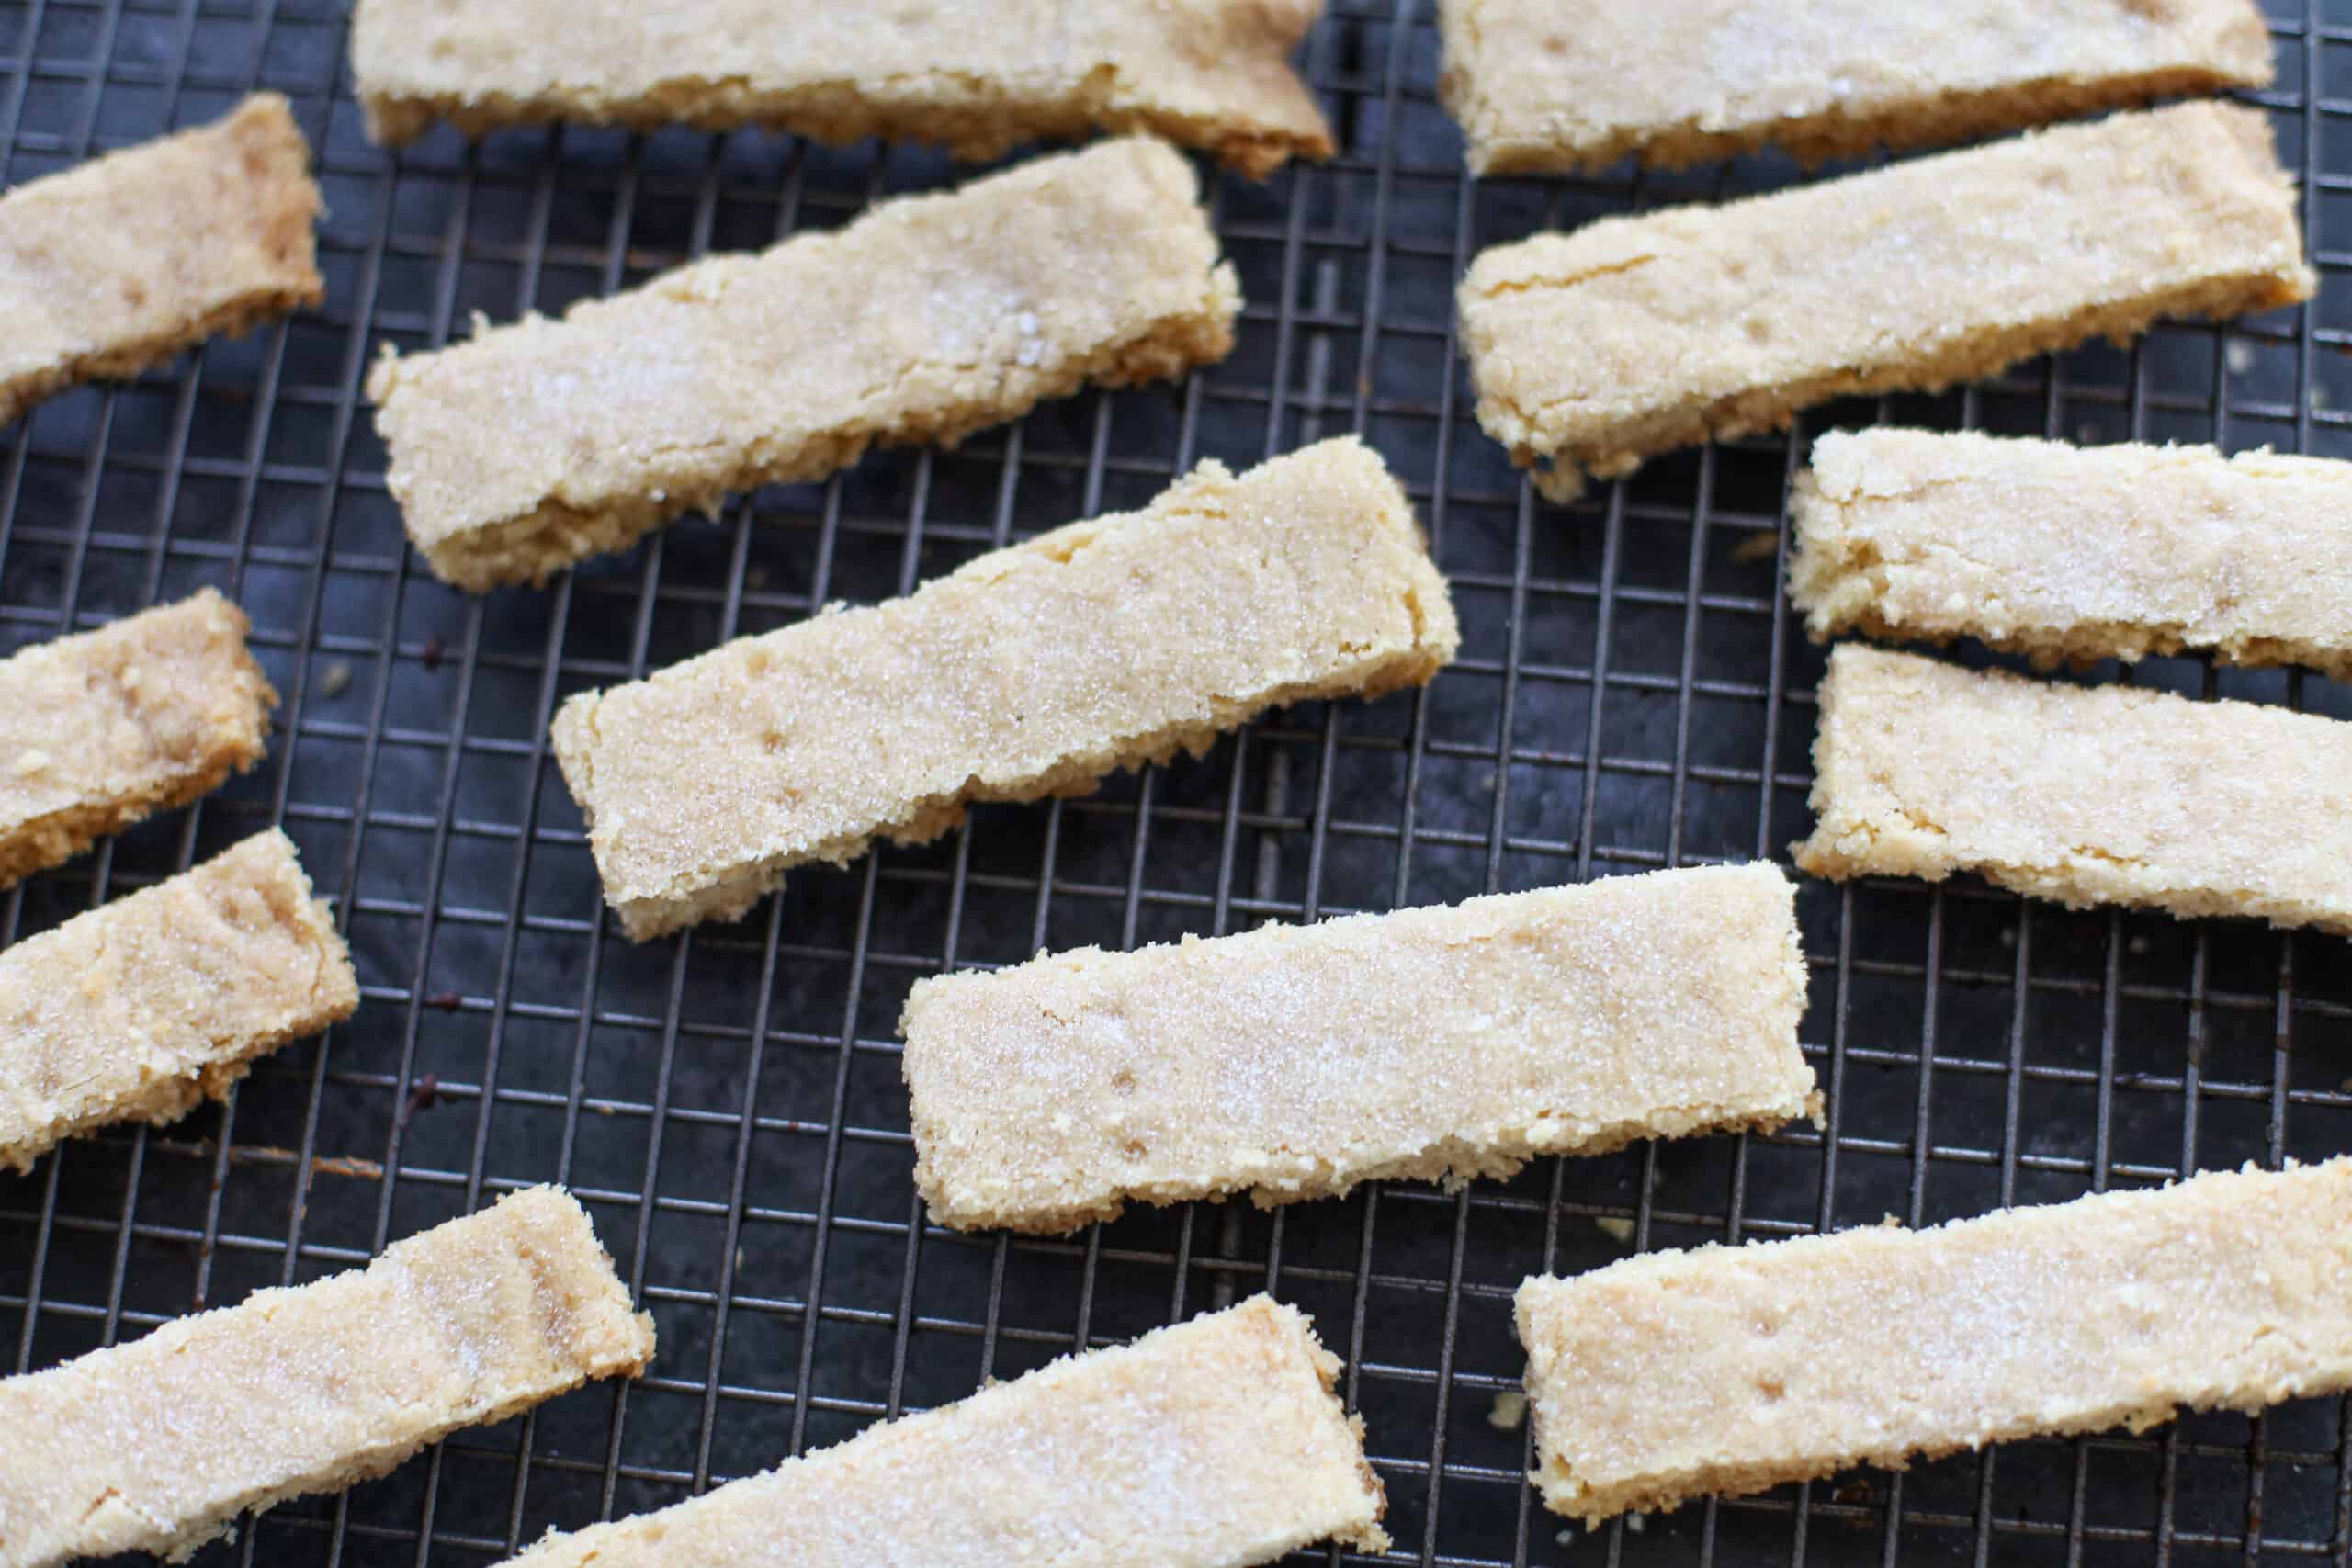 A tray of shortbread fingers.